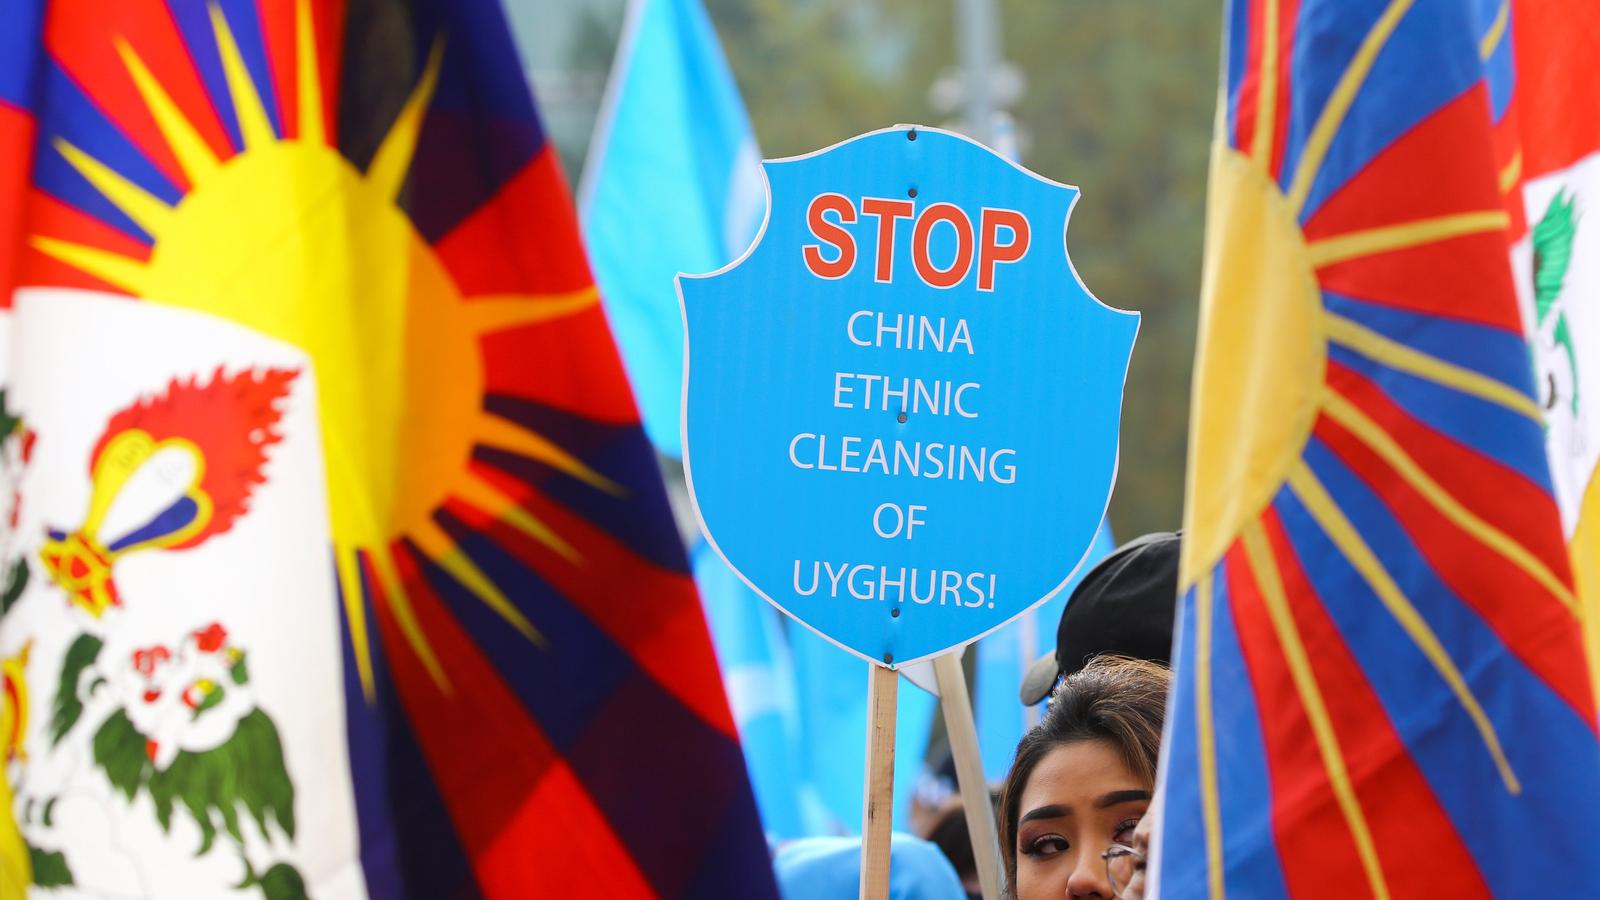 A woman's face appears amidst colorful signs protest against China's Uyghar detention centers. 